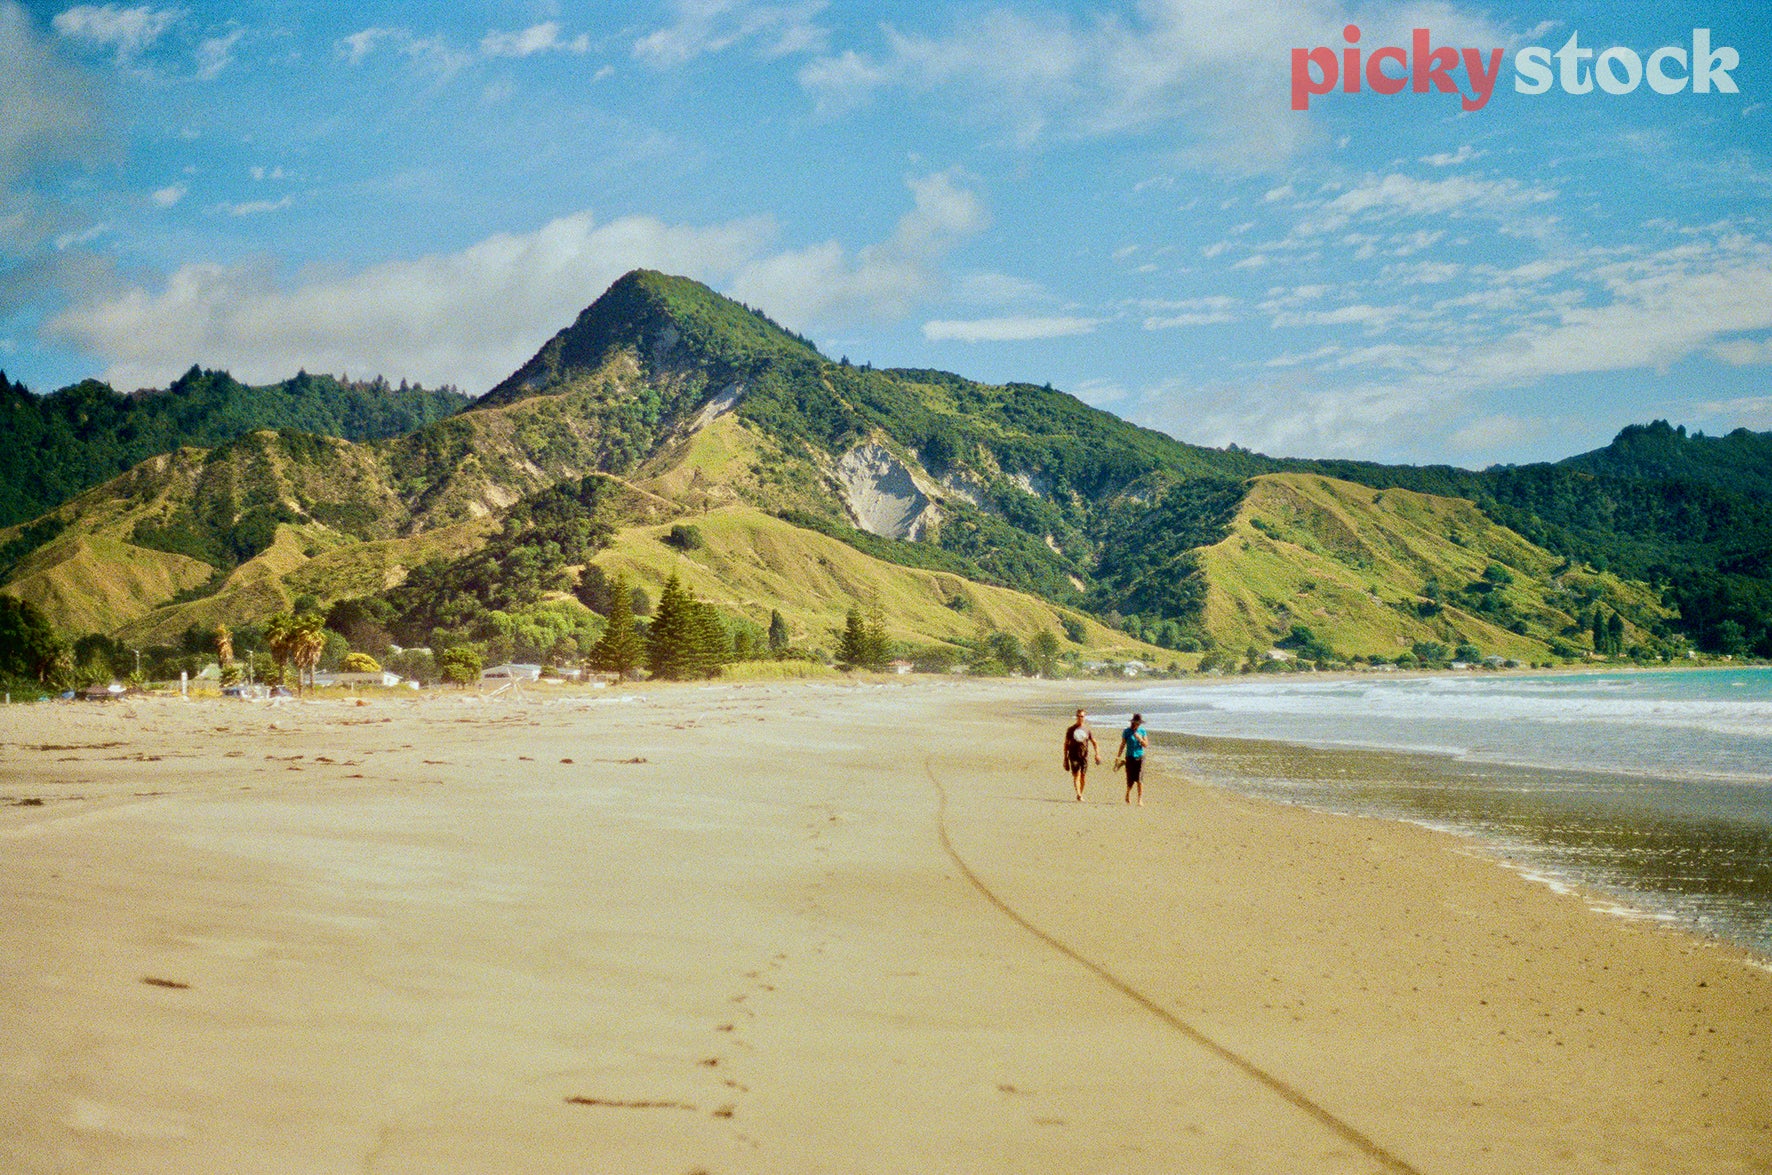 Wide landscape shot of two people walking down the beach, facing camera. Low tide with dramatic hills in background, and small settlement, campsite at the edge of the sand. Sky is blue with scattered clouds